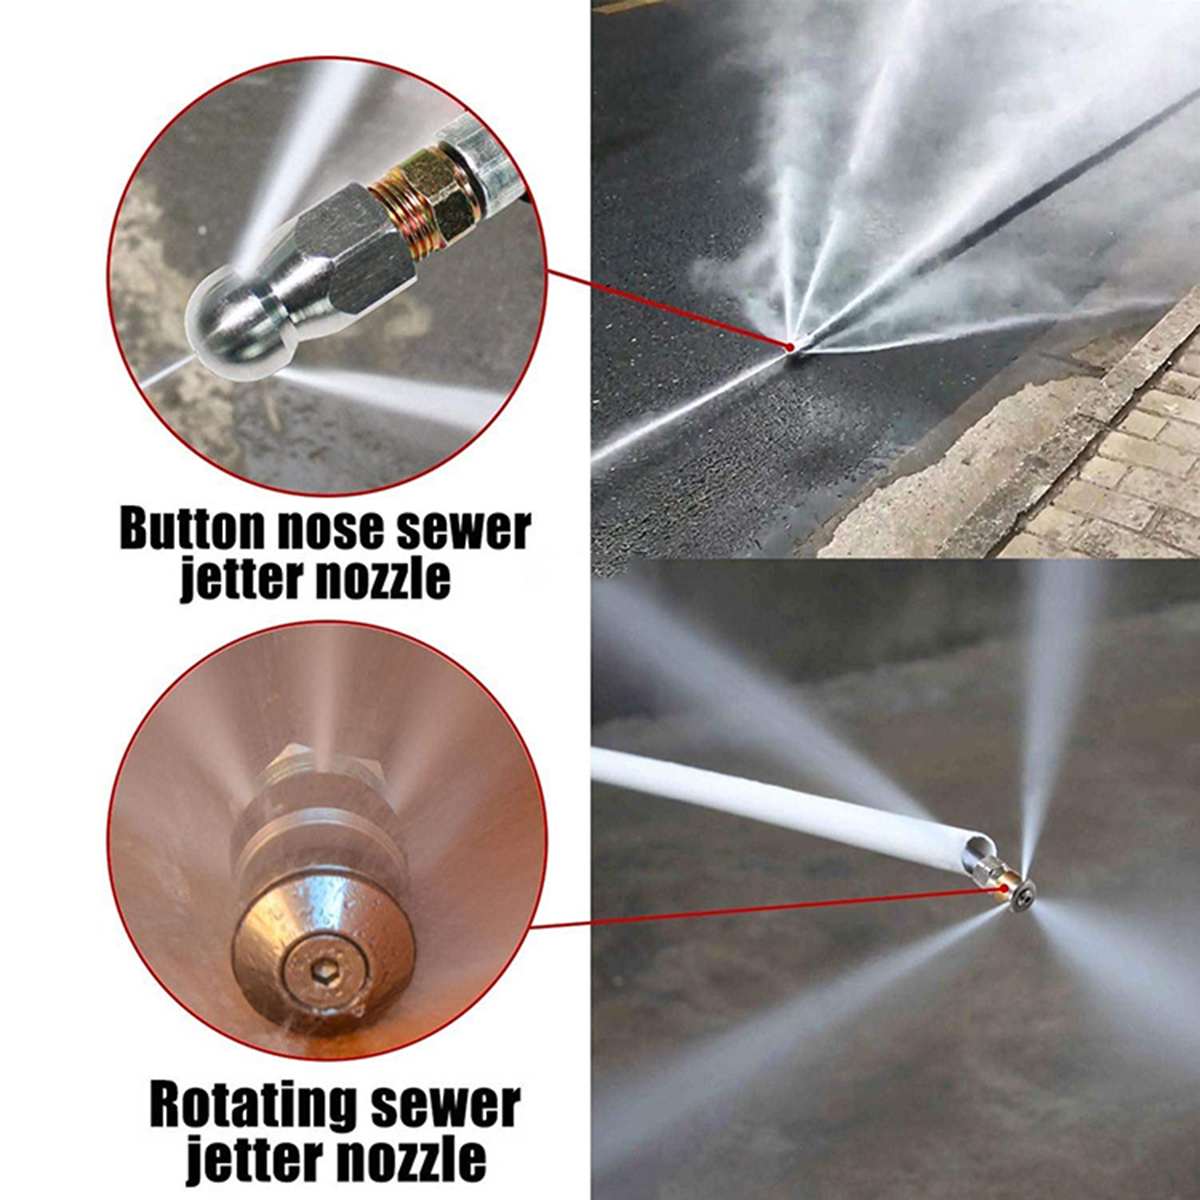 Sewer Jetter Kit for karcher Pressure Washer Hose, 1/4 Inch NPT,Drain Cleaning Hose, Button Nose & Rotating Sewer Jetting Nozzle